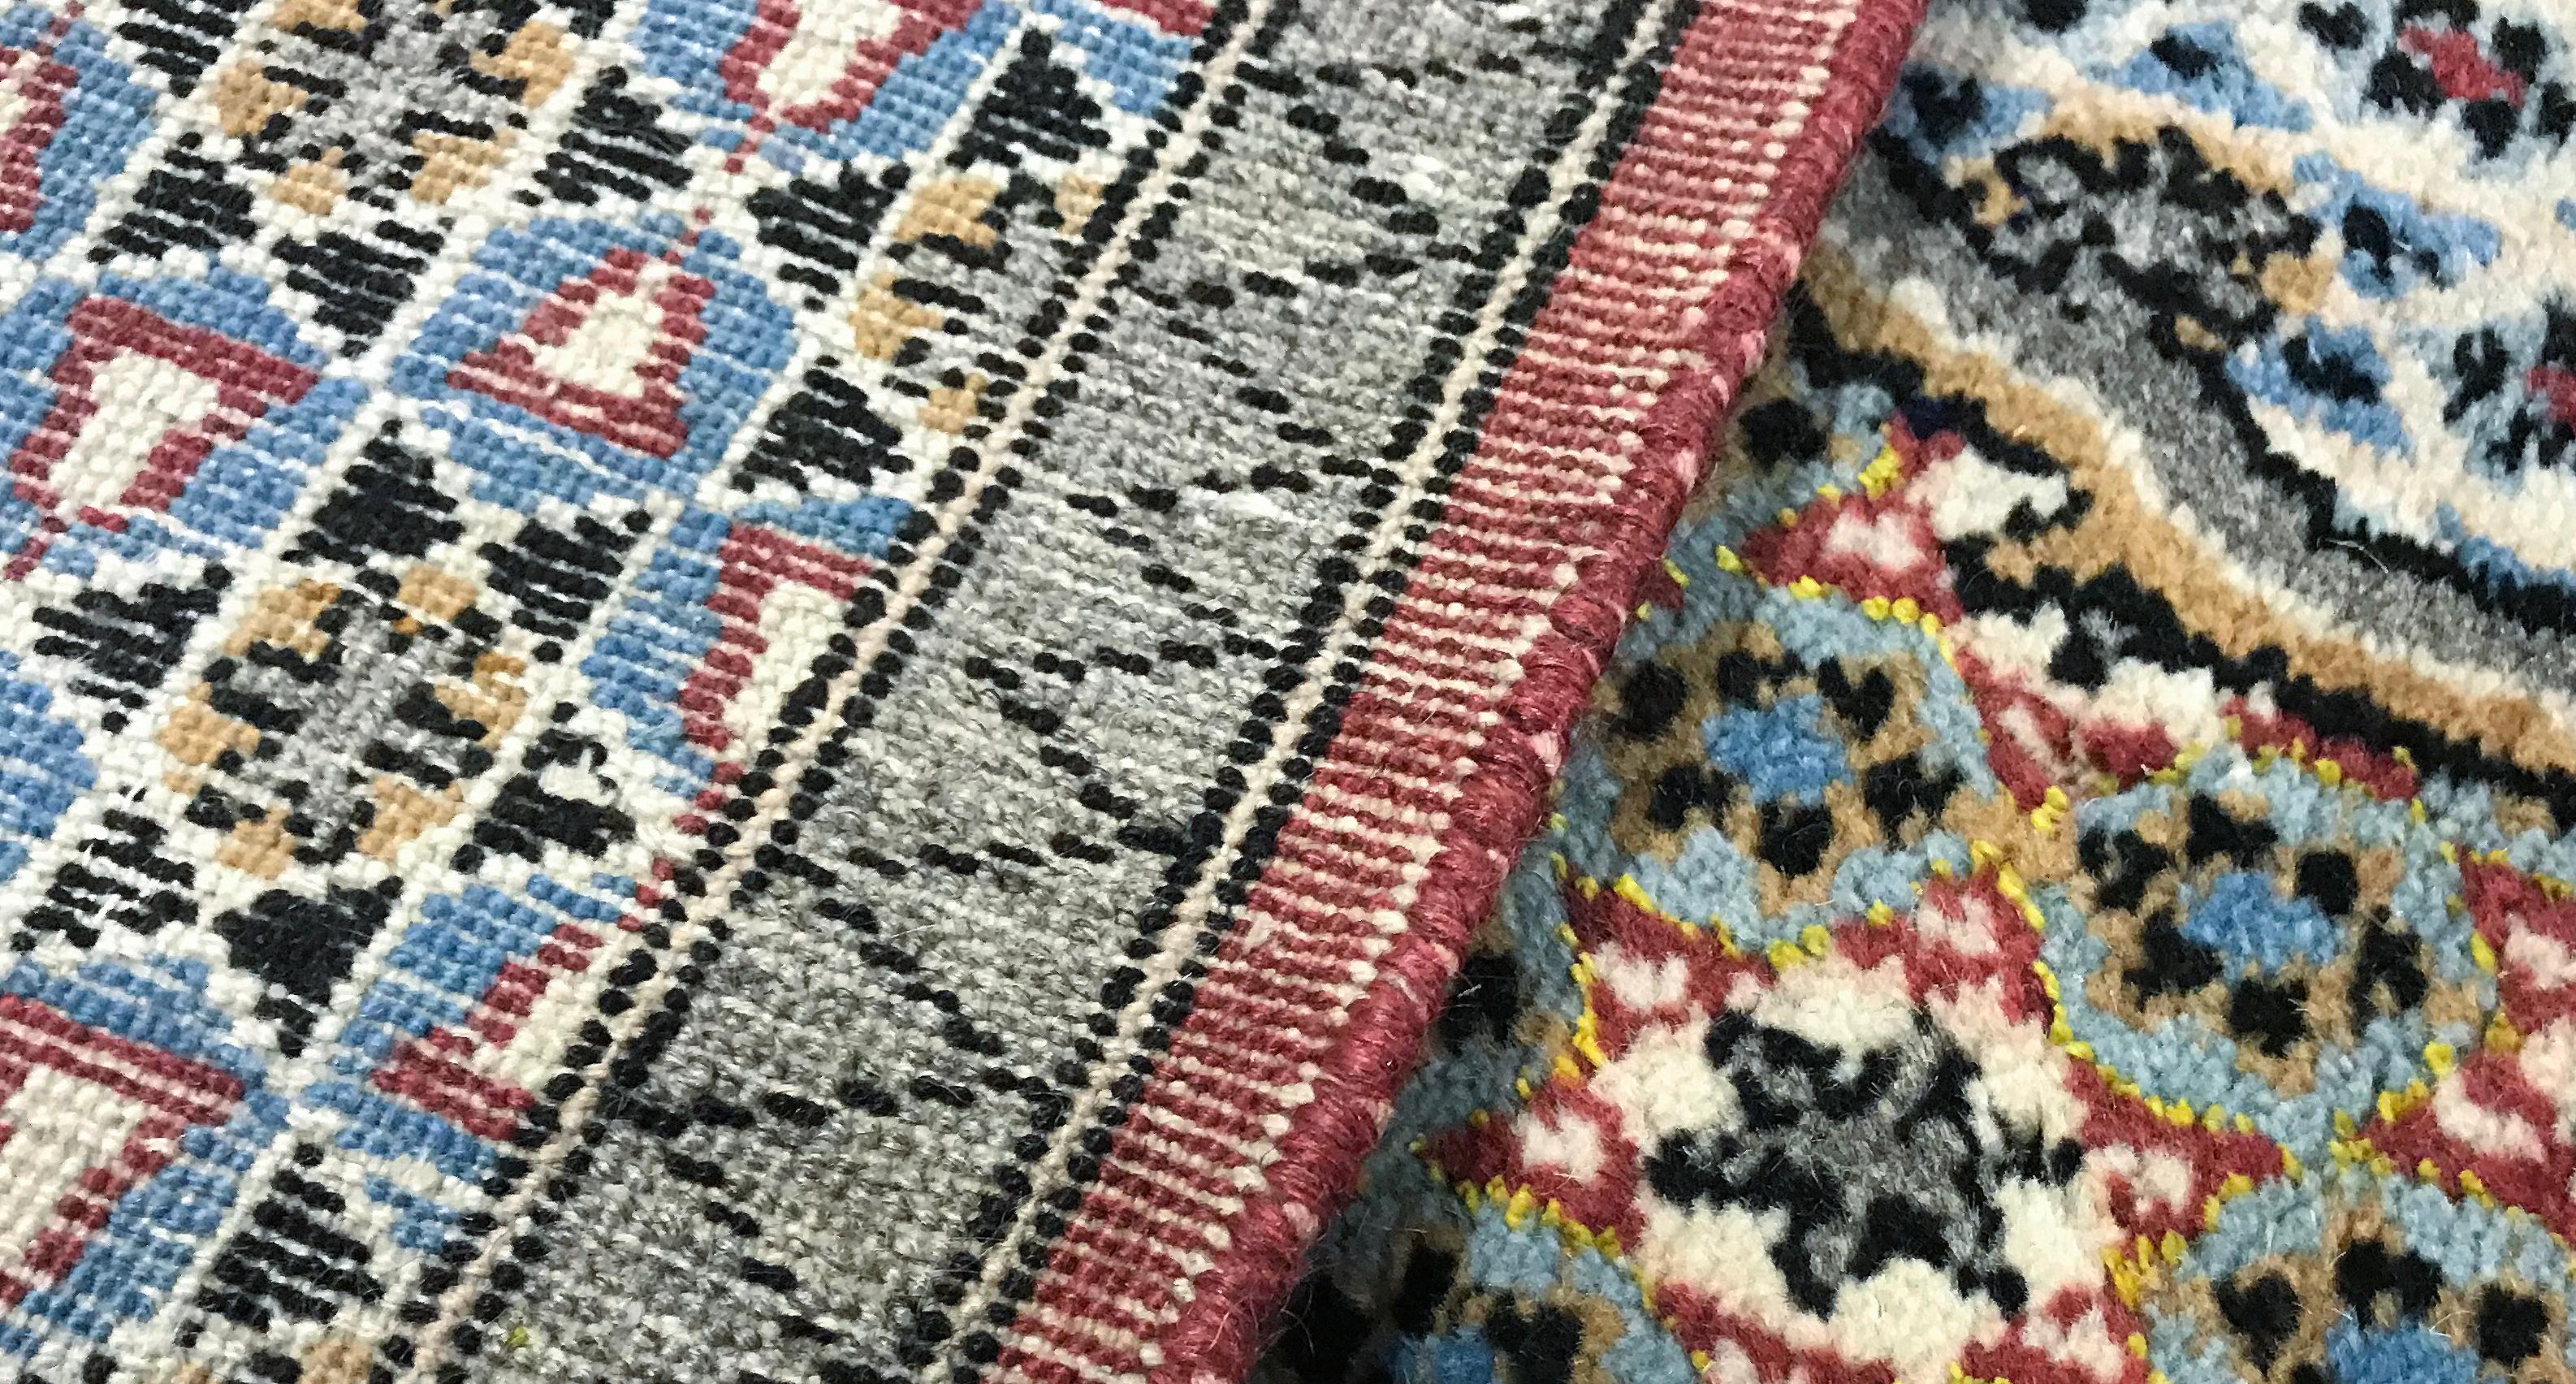 Based on authentic Oriental designs and using only the finest of wool's, these handwoven rugs are truly timeless classics. These traditional styles reflect the classic patterns that have created the most beautiful of decors over the centuries.